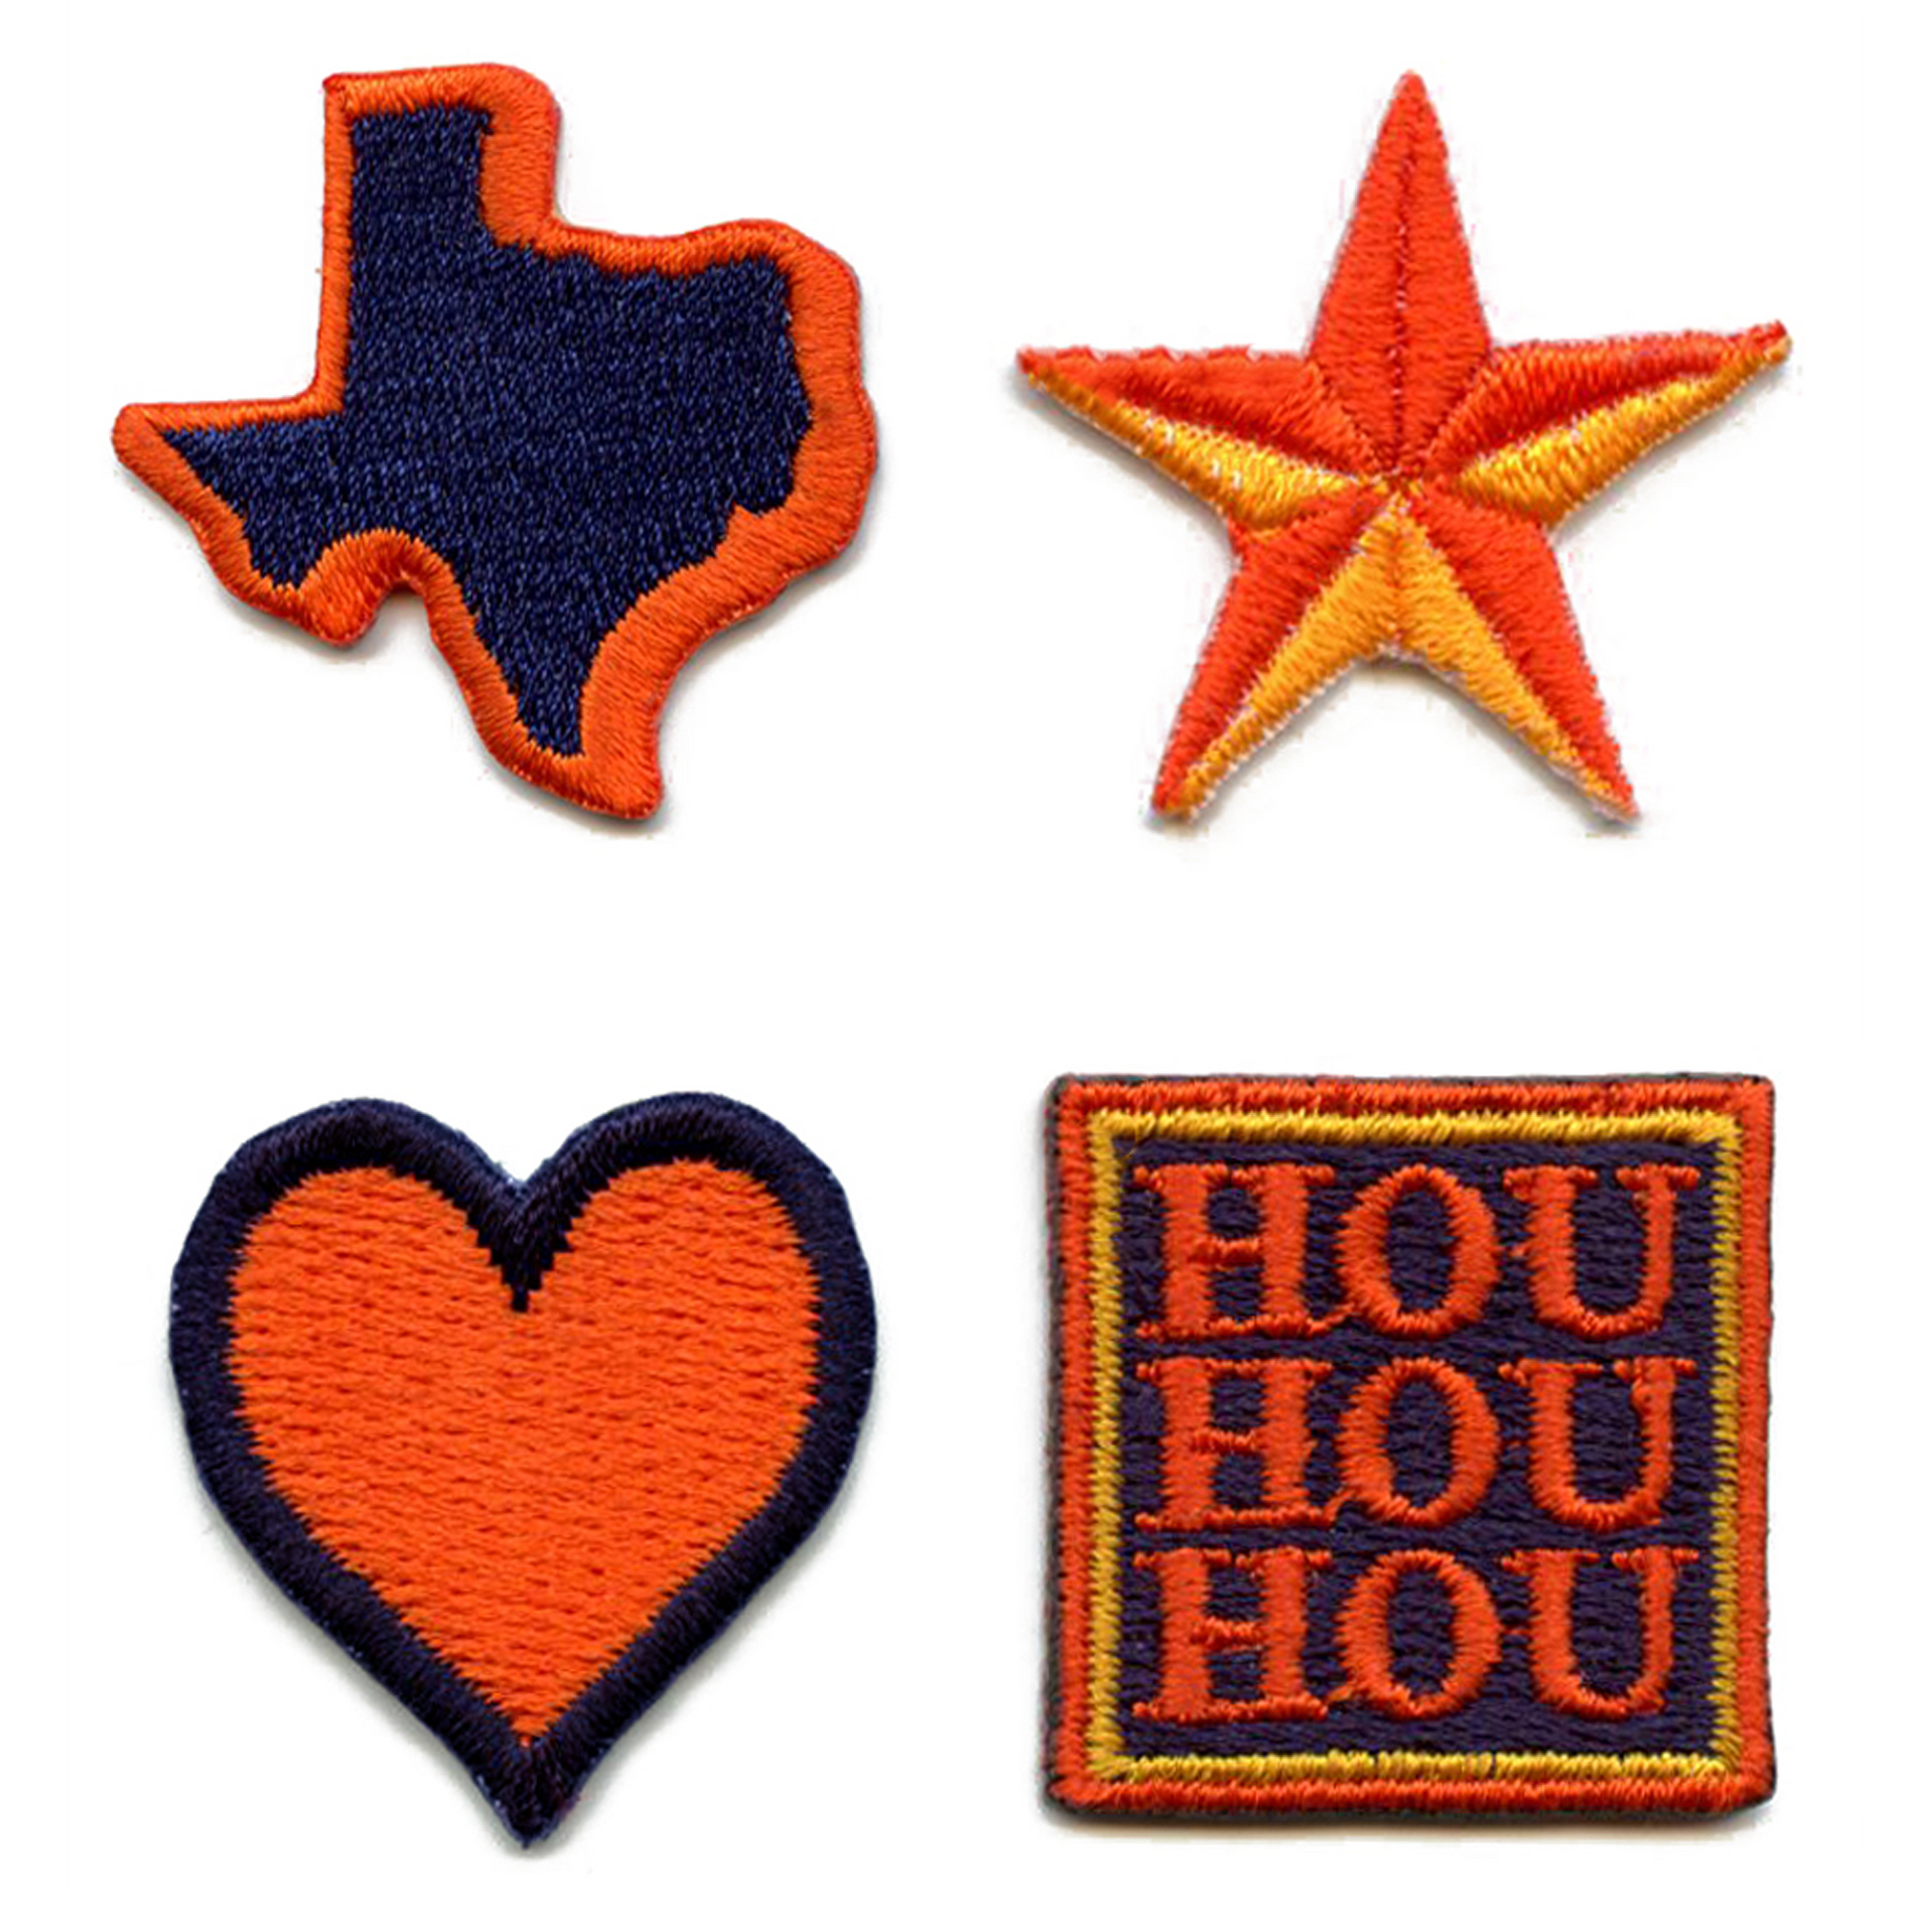 Houston HOU Heart Star 4 Pack Patch Mini Sports Texas Embroidered Iron On